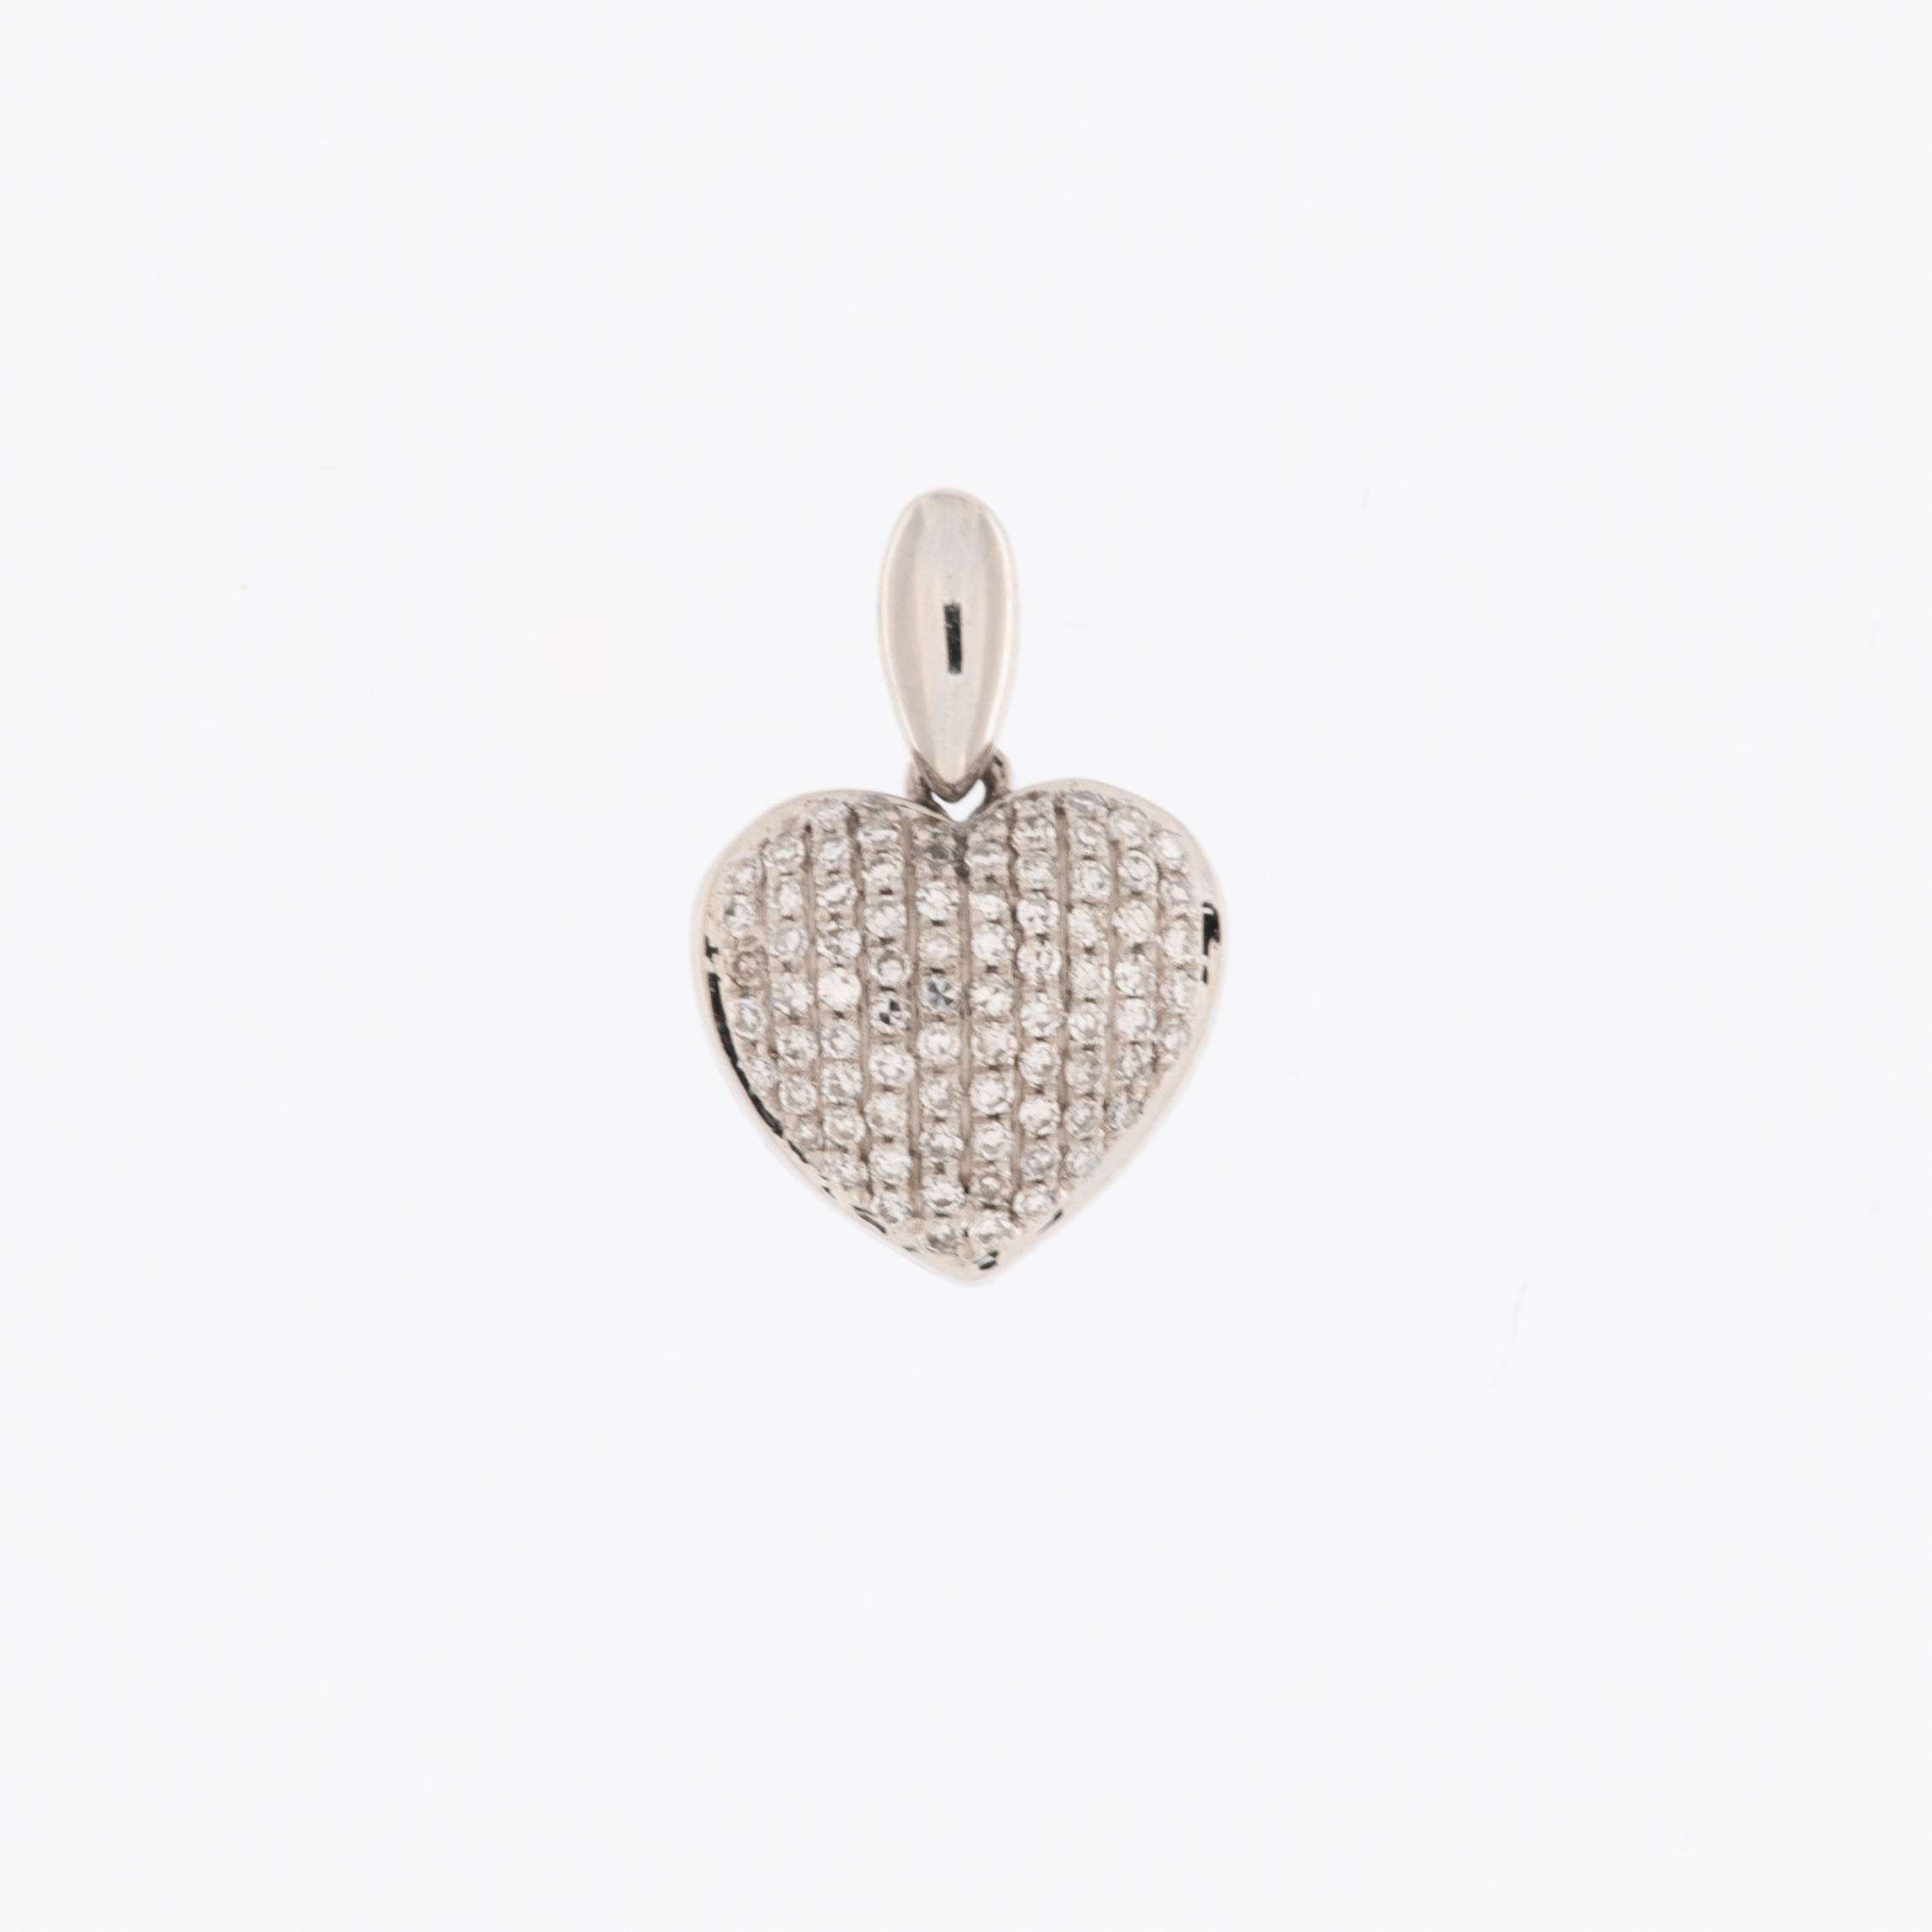 The Diamonds Pavé Heart Pendant in White Gold is a stunning emblem of grace and elegance. Crafted from 18-karat white gold, this pendant boasts a contemporary design adorned with dazzling brilliance.

The pendant features a cluster of brilliant-cut